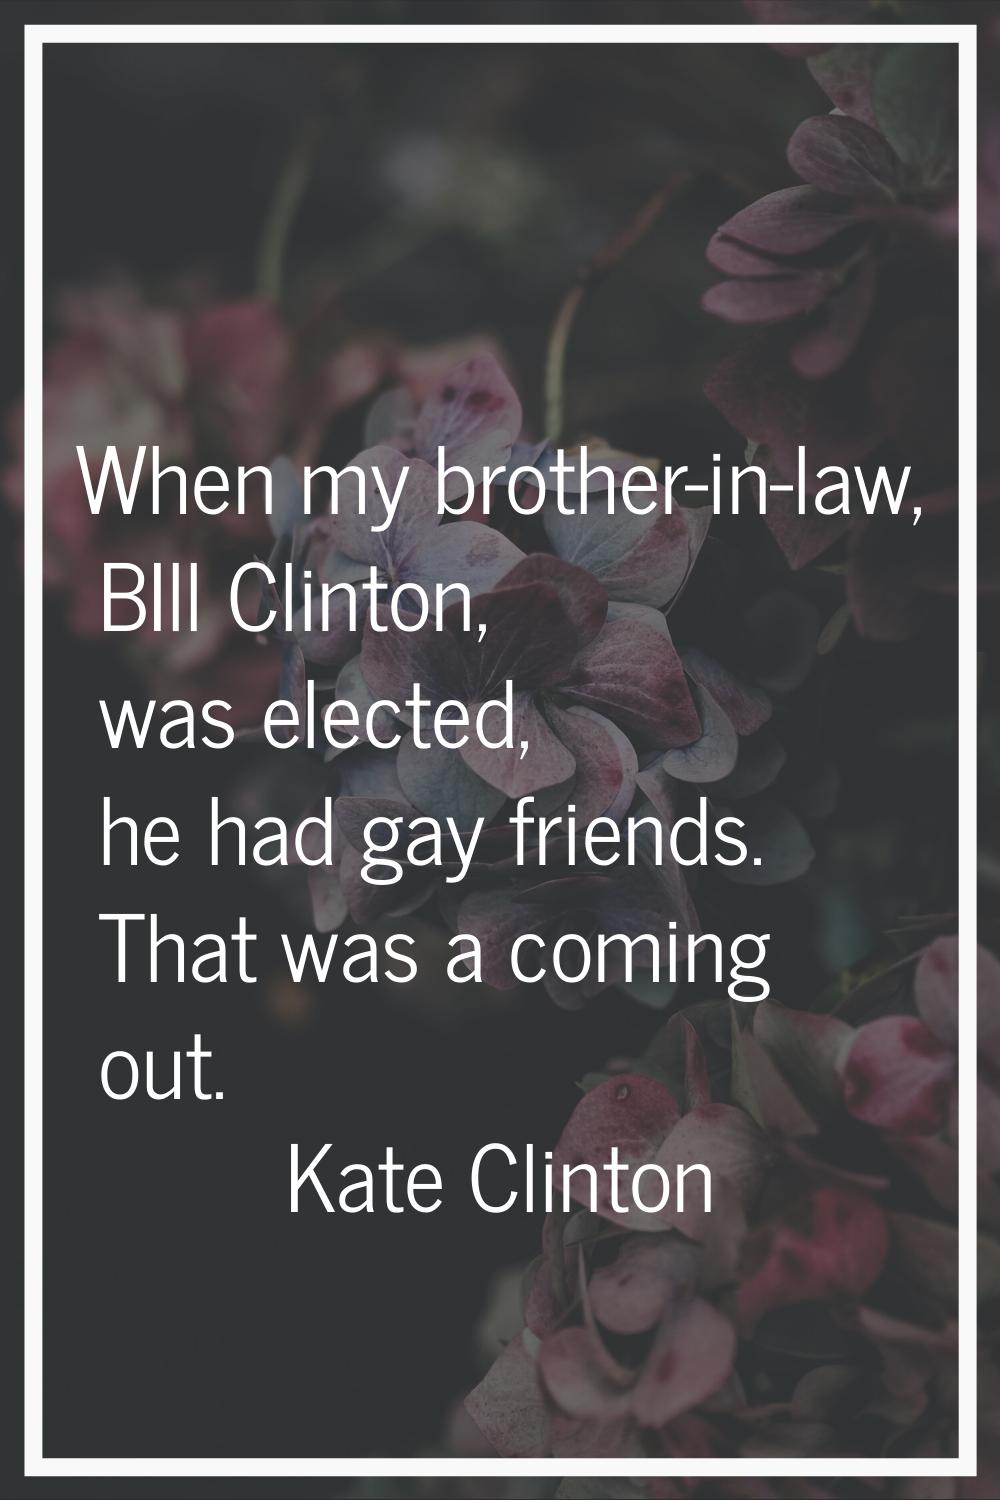 When my brother-in-law, BIll Clinton, was elected, he had gay friends. That was a coming out.